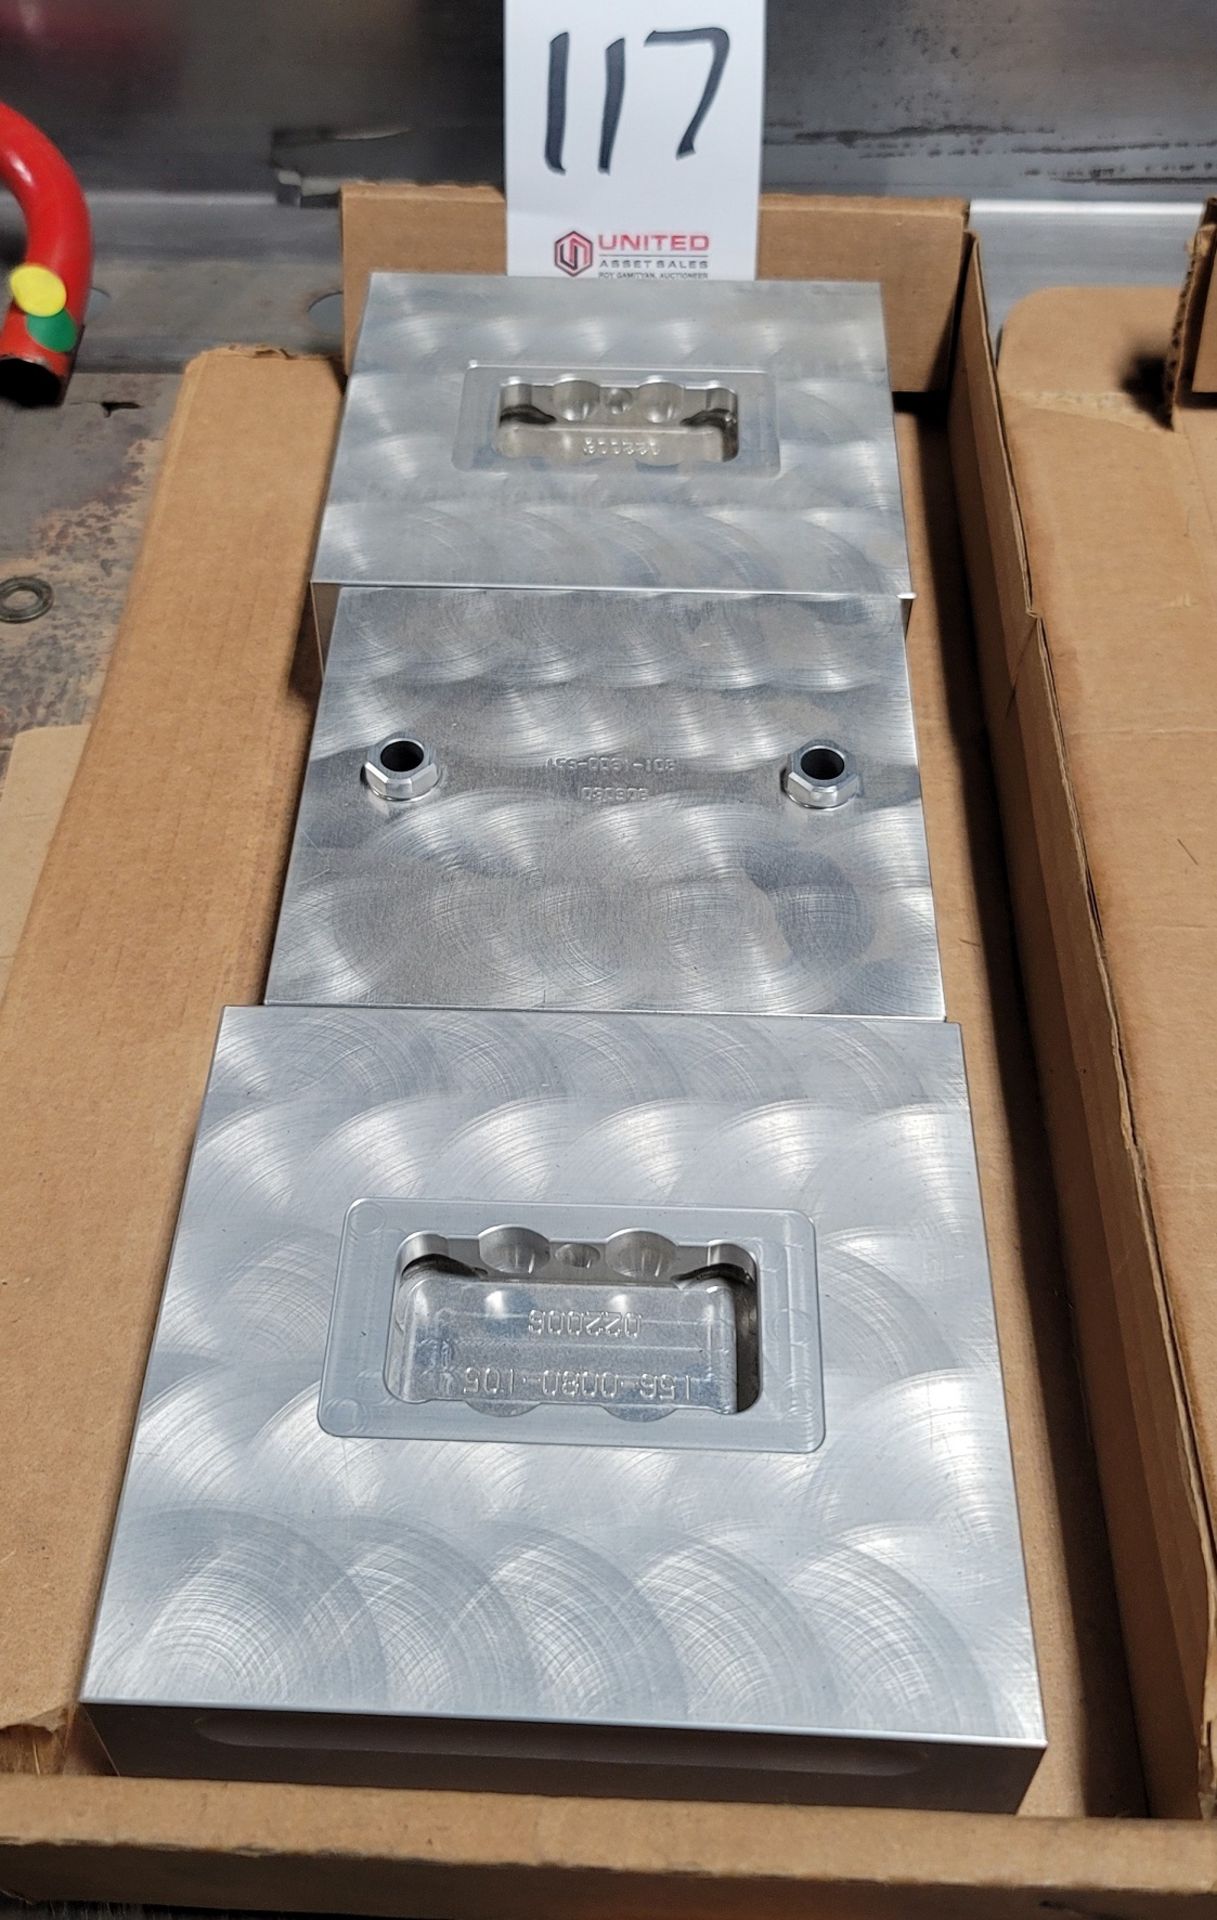 LOT - (1) SET OF 6" CHICK VISE TOP PLATES, ALUMINUM, **IMMEX REGISTERED EQUIPMENT (NEEDS TO RETURN